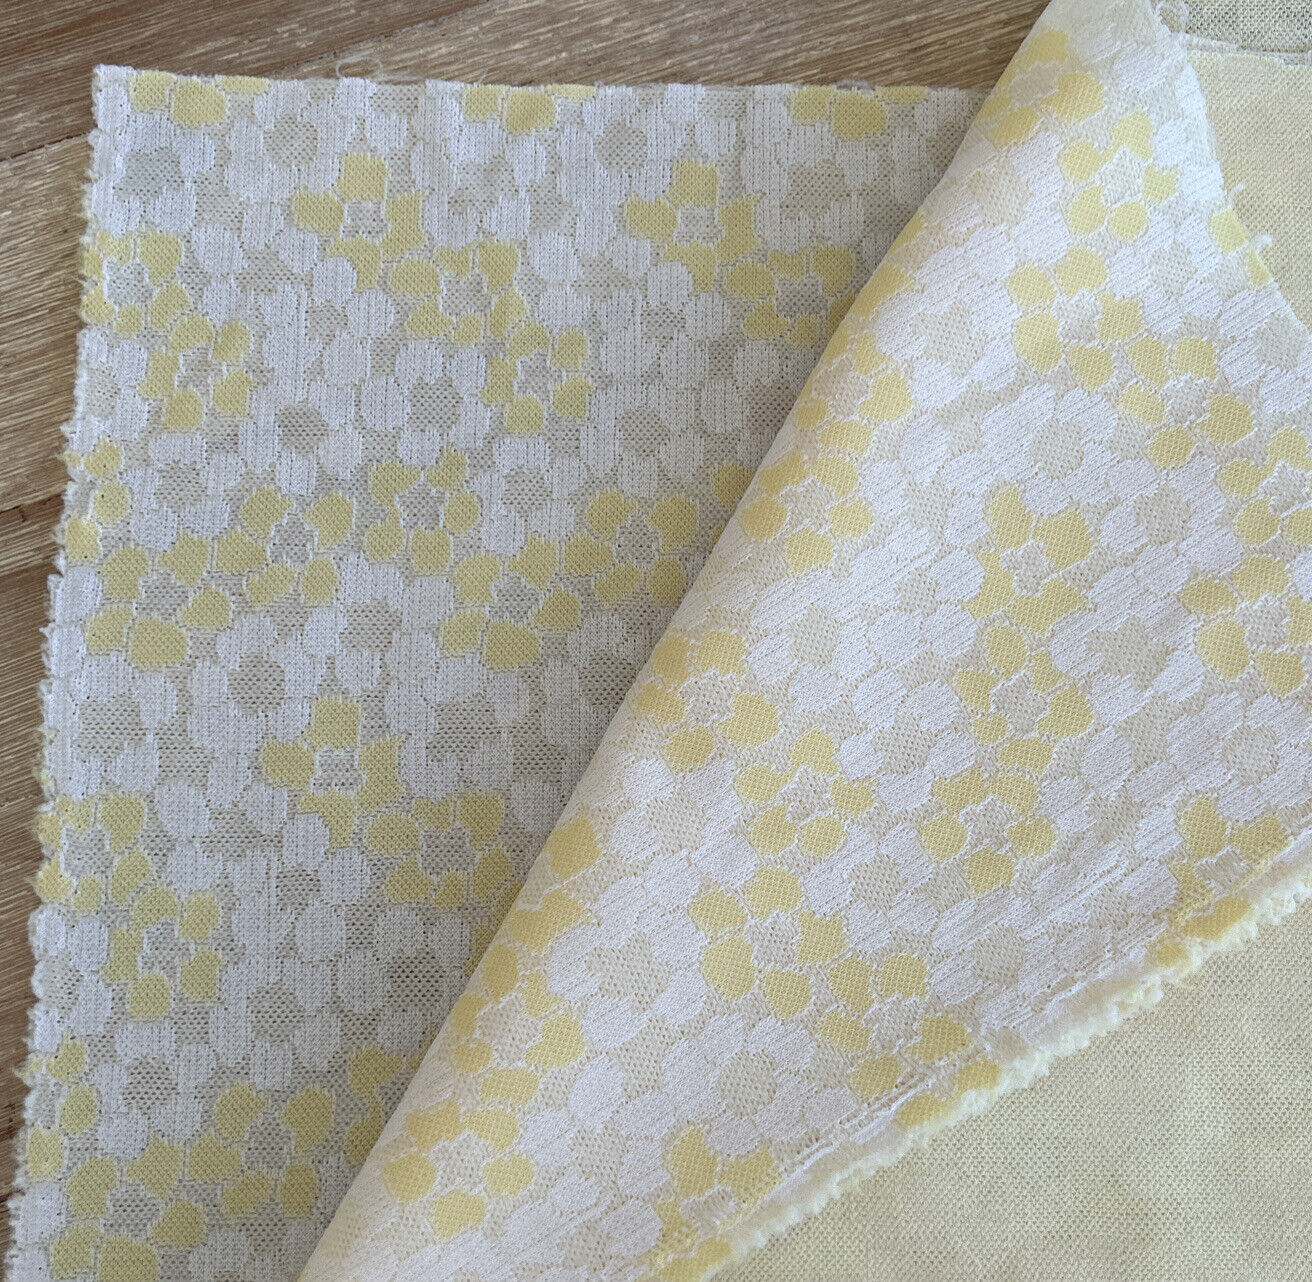 VTG Mid Century Modern MCM Yellow Floral Daisy Polyester Fabric 3 yds 108” x 64”